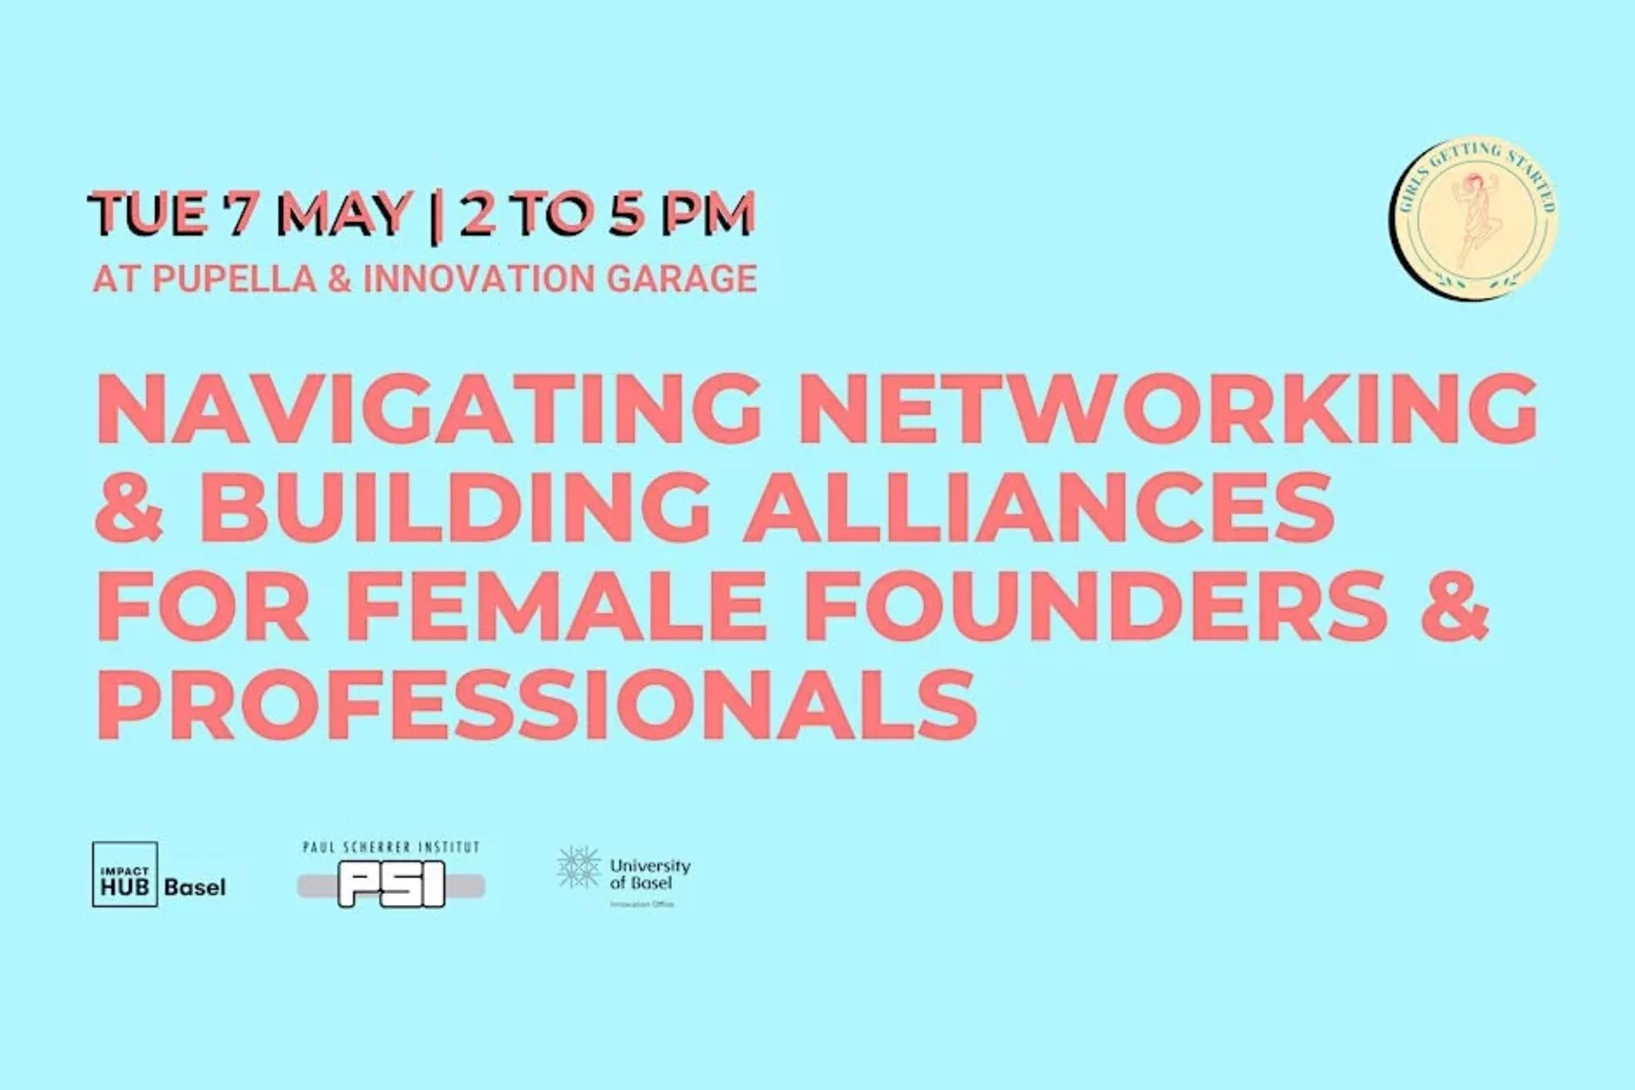 The event "Navigating Networking and Building Alliances" for female founders and professionals takes place on 7th May.